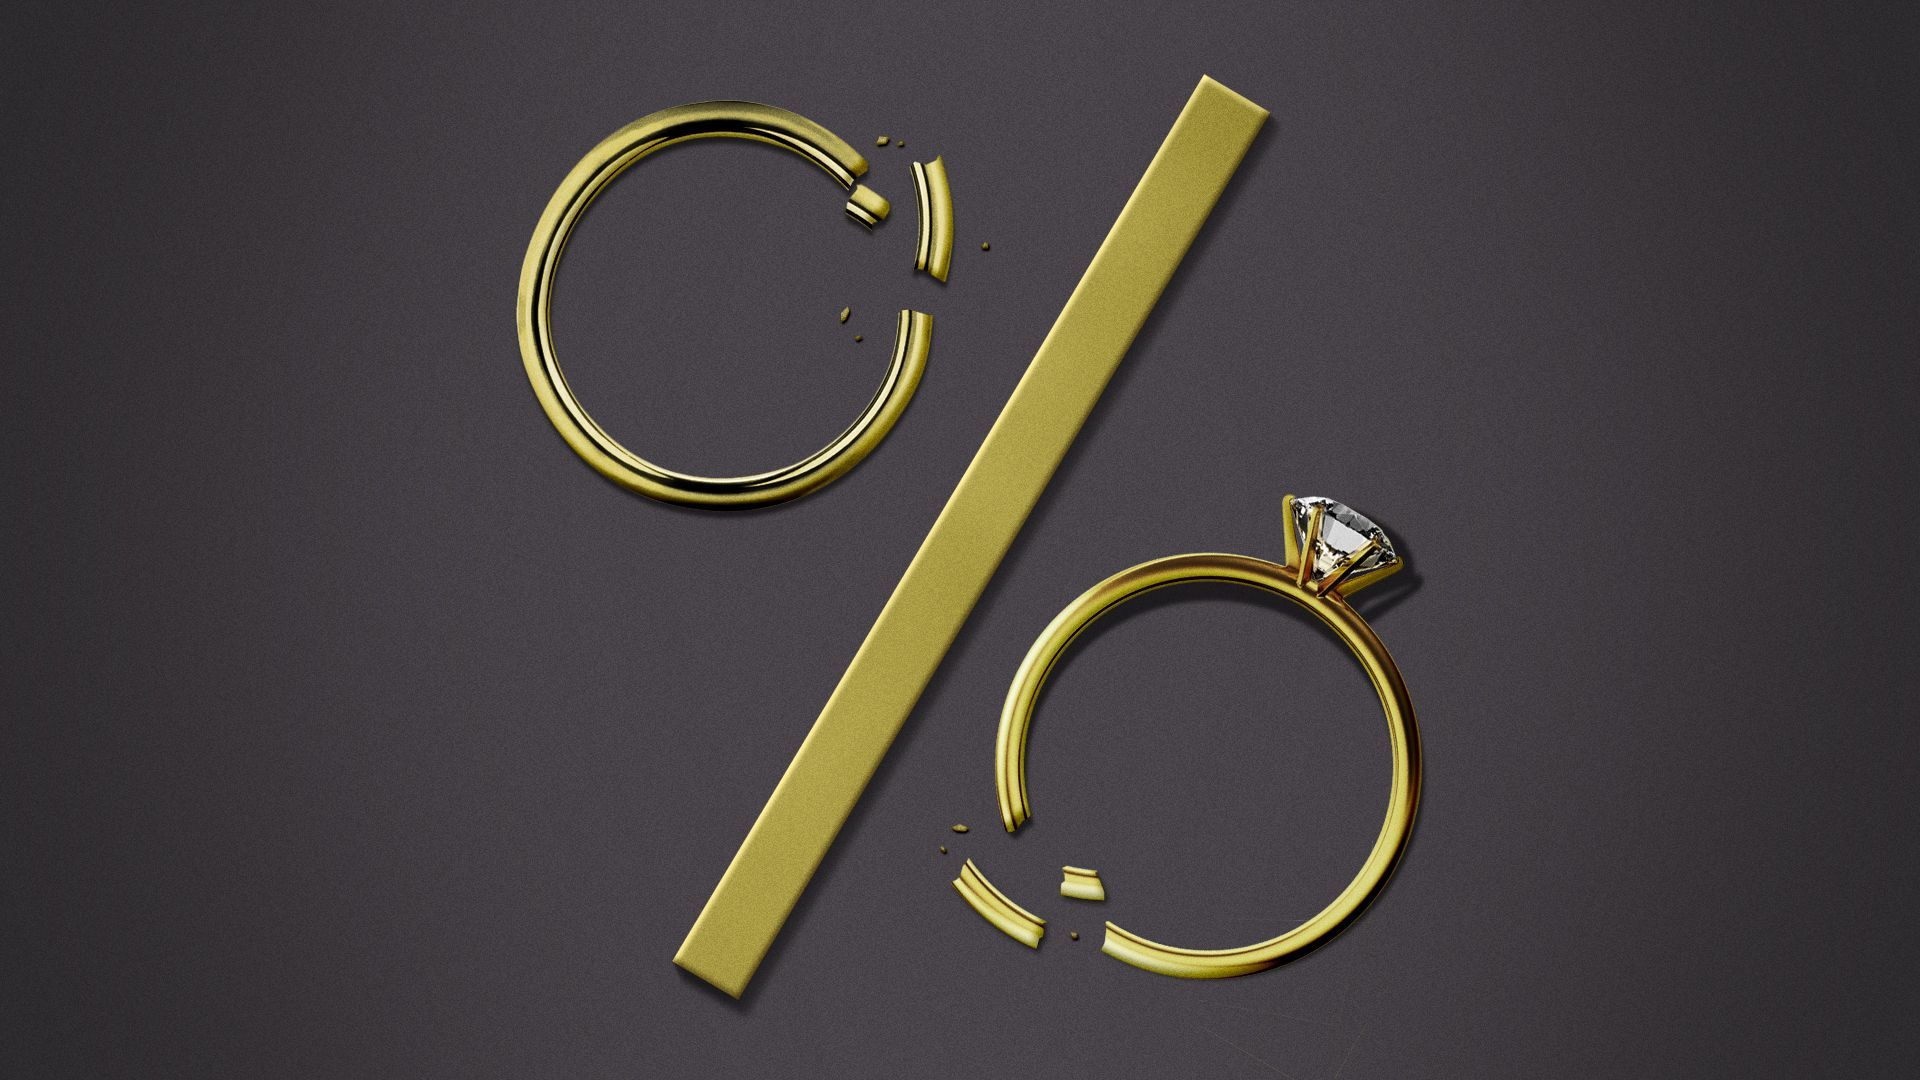 Illustration of a golden percentage symbol, but the 0's are broken wedding rings.